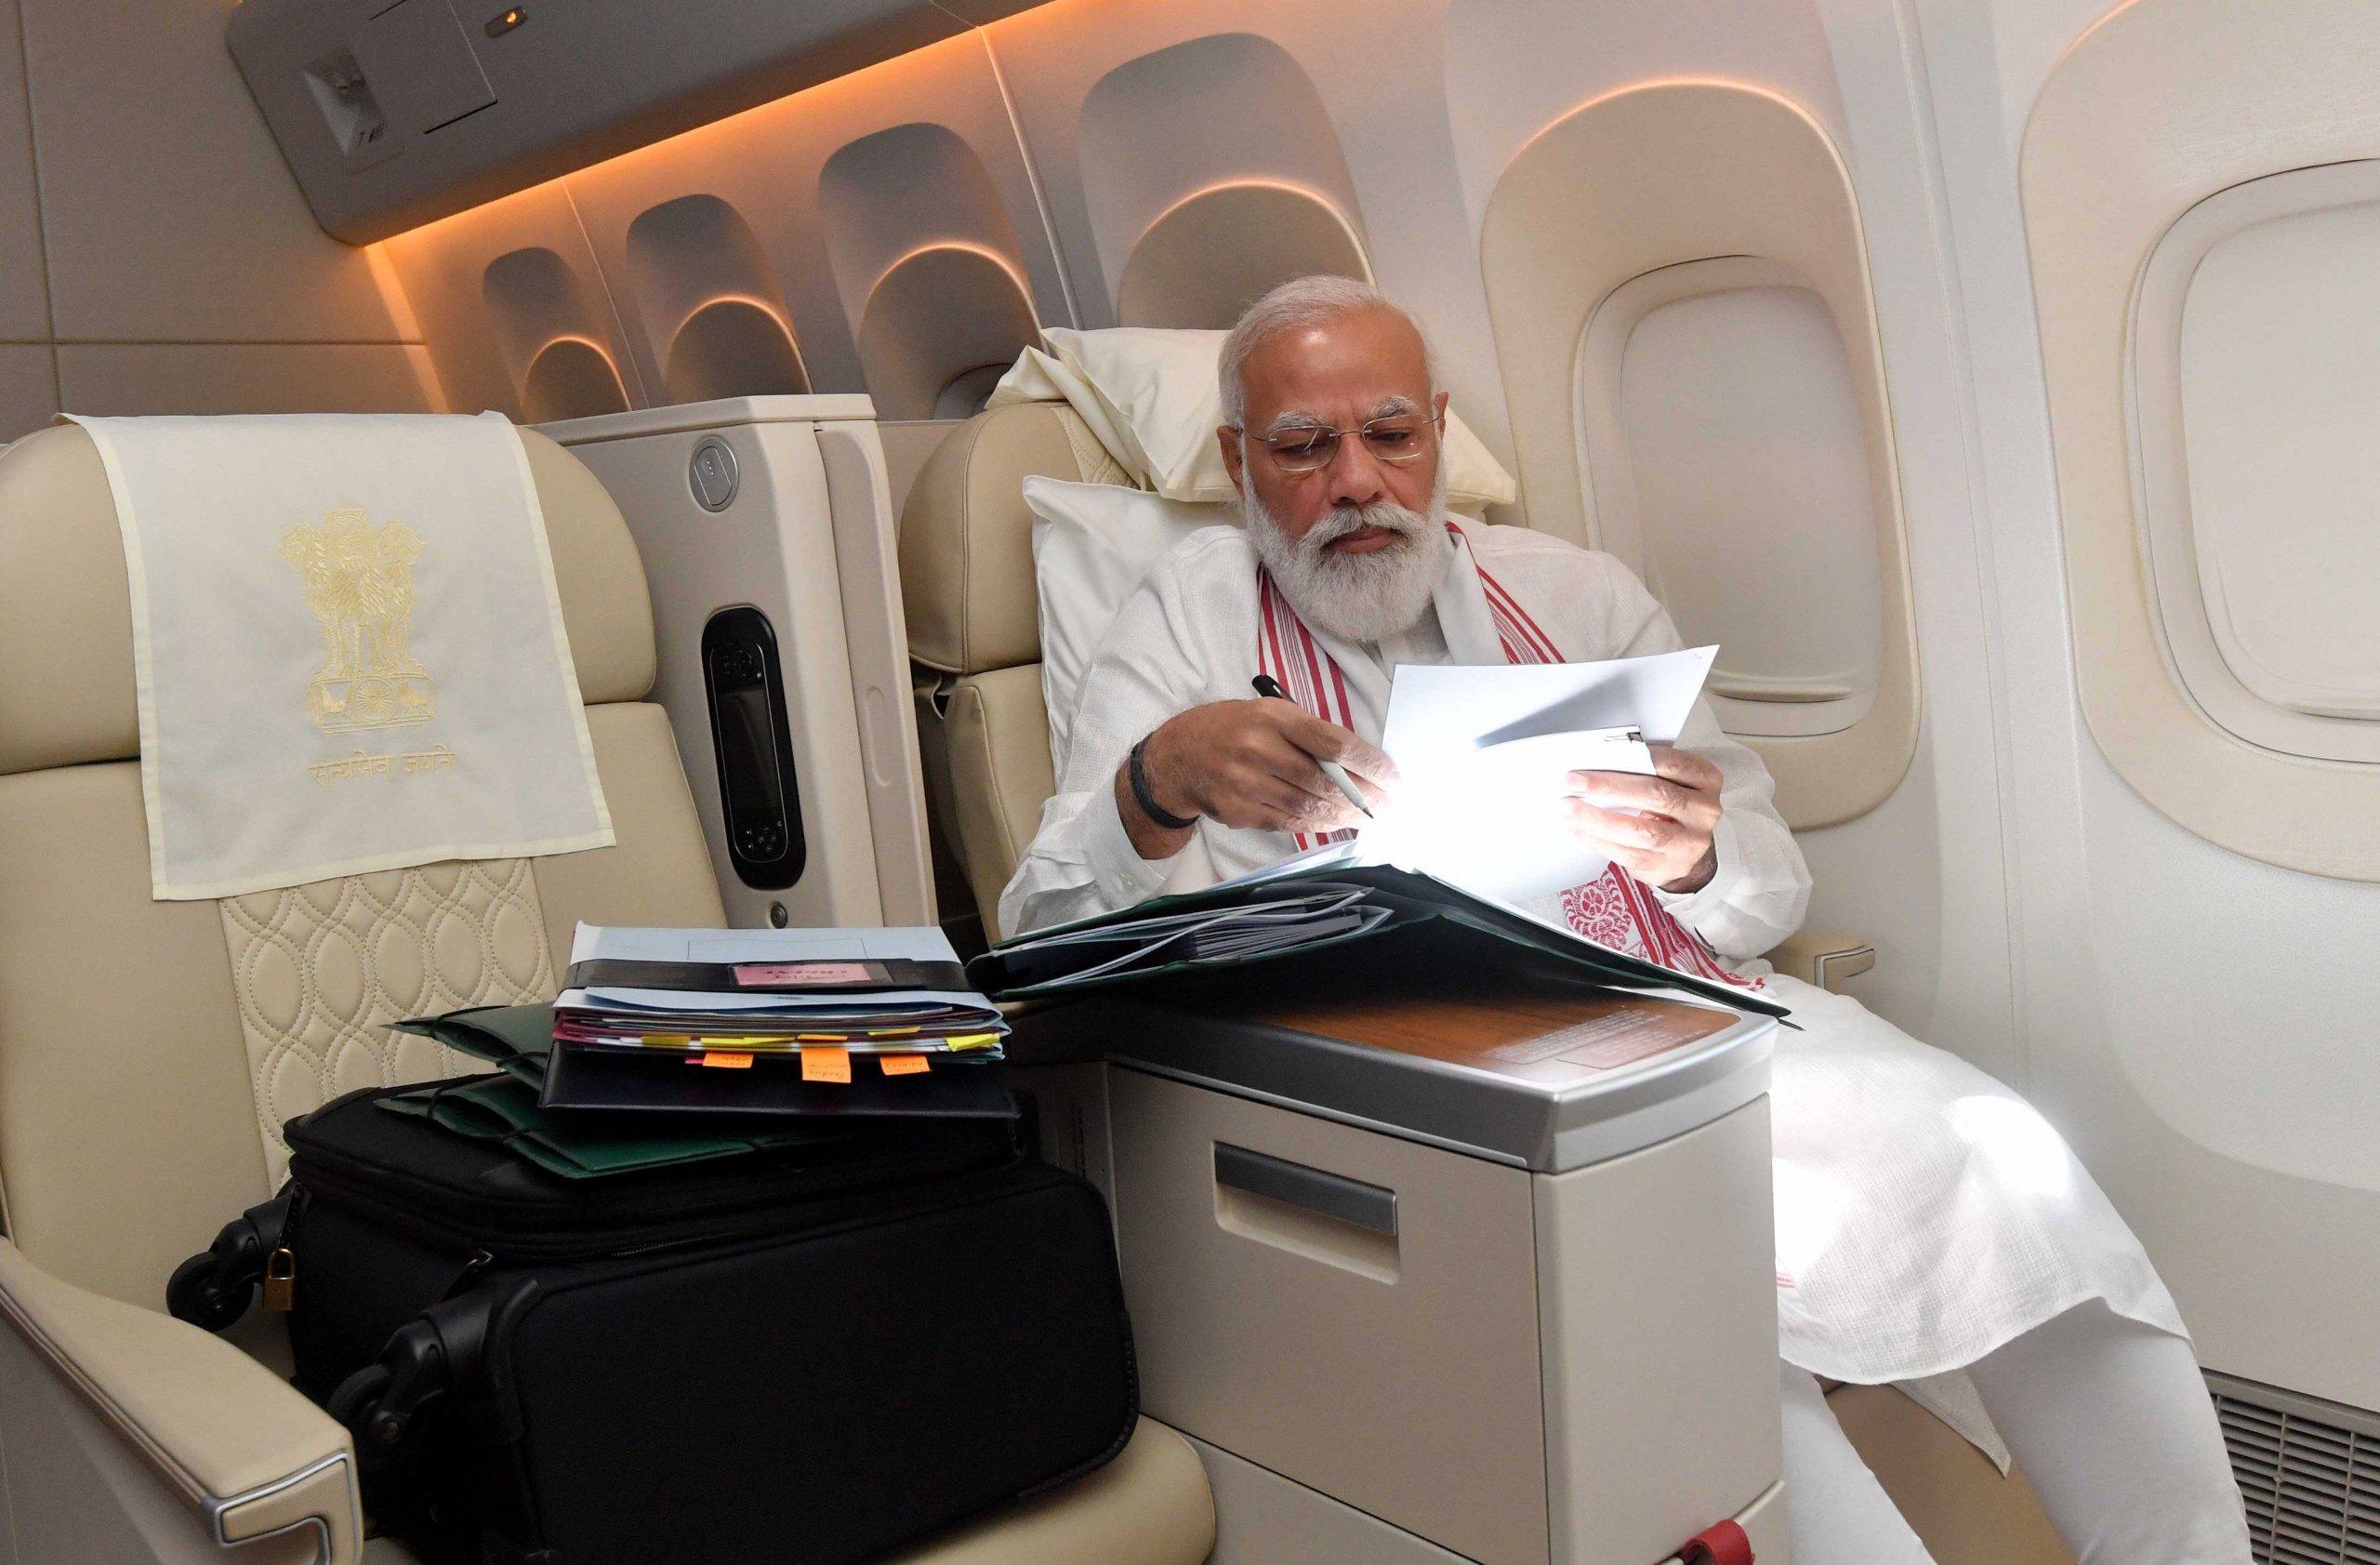 PM Modi on US trip finishes up paperwork mid-air, BJP salutes work-ethic